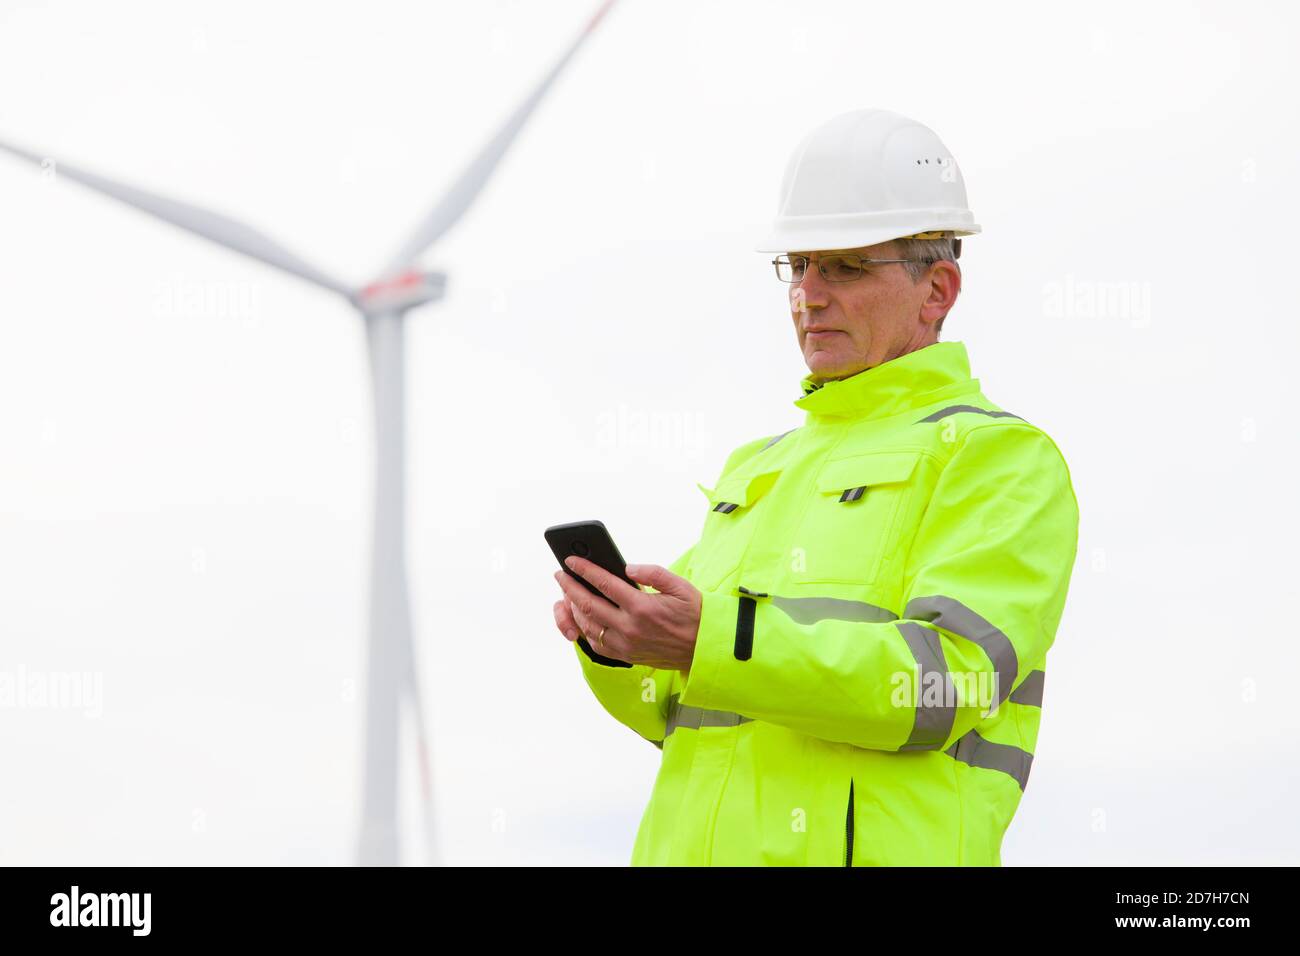 Mature engineer looking at smart phone in front of a wind turbine - focus on  the face Stock Photo